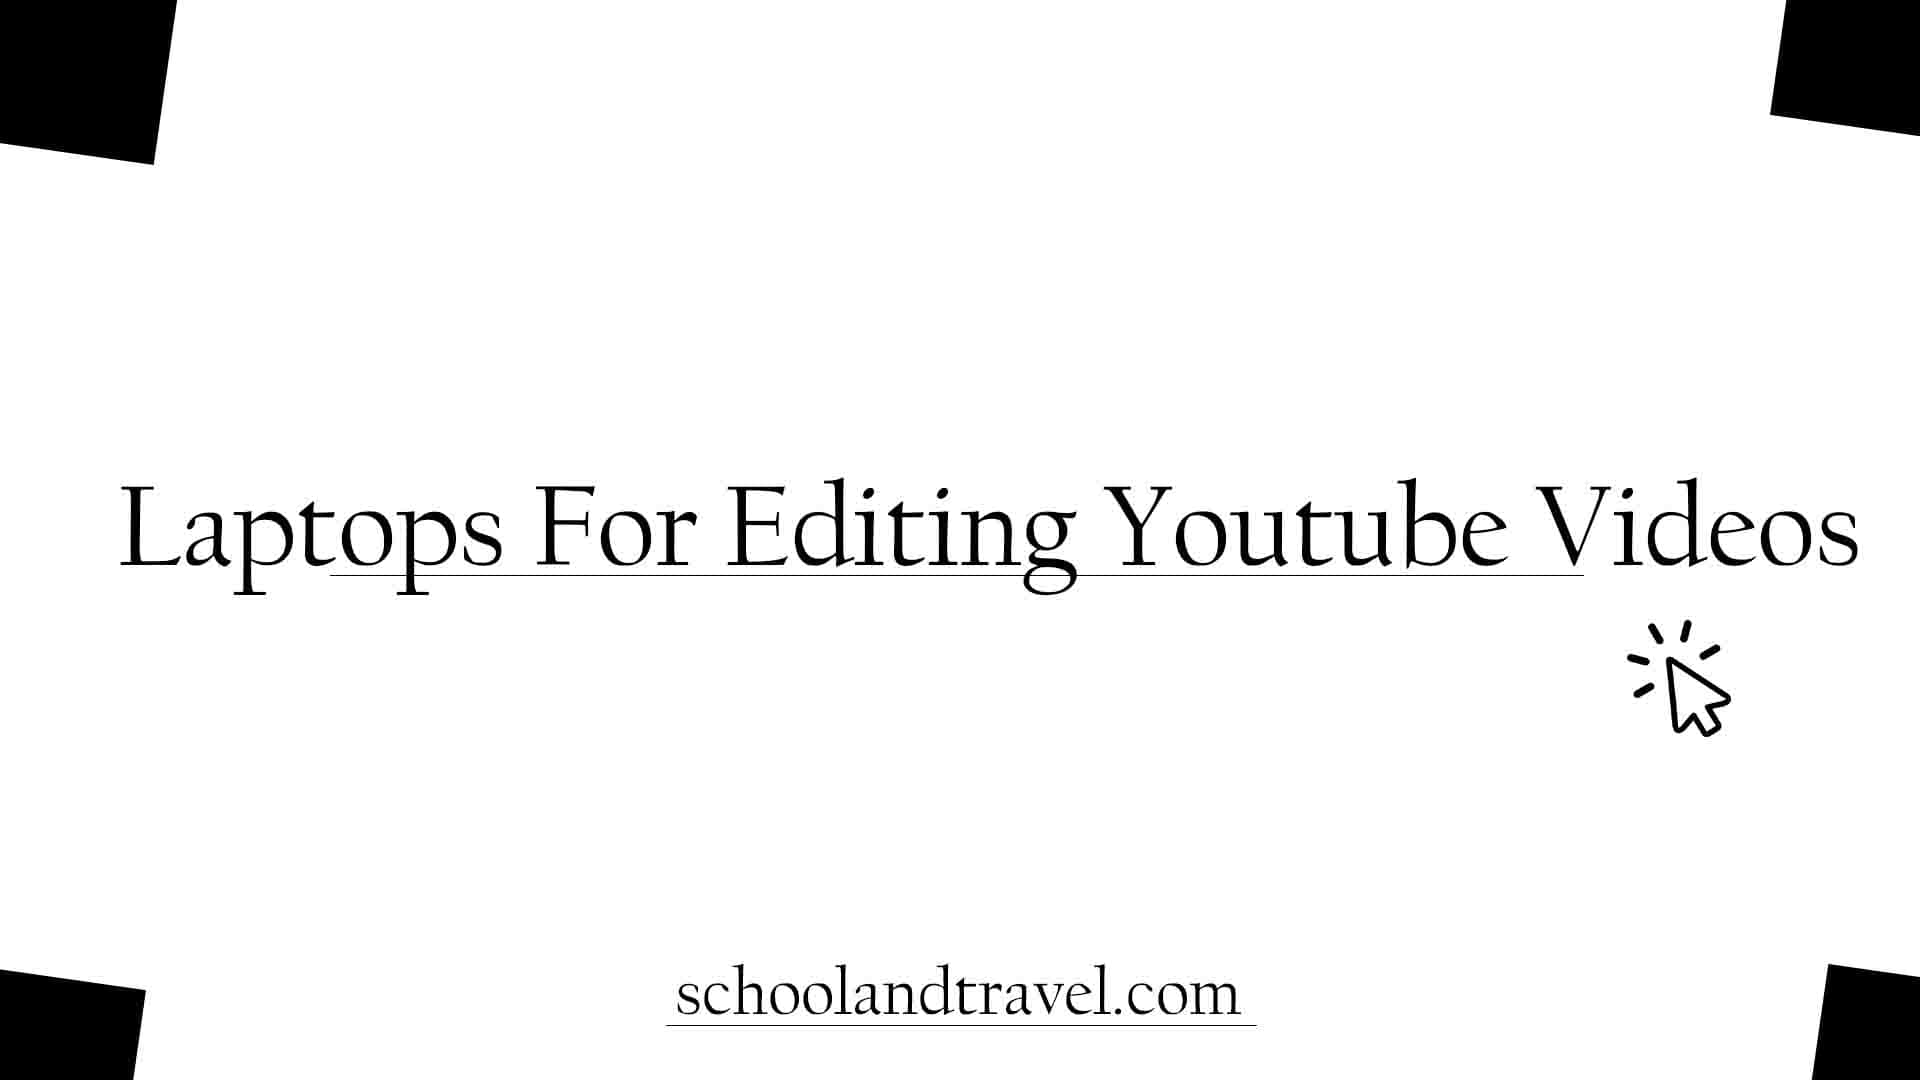 Laptops For Editing Youtube Videos